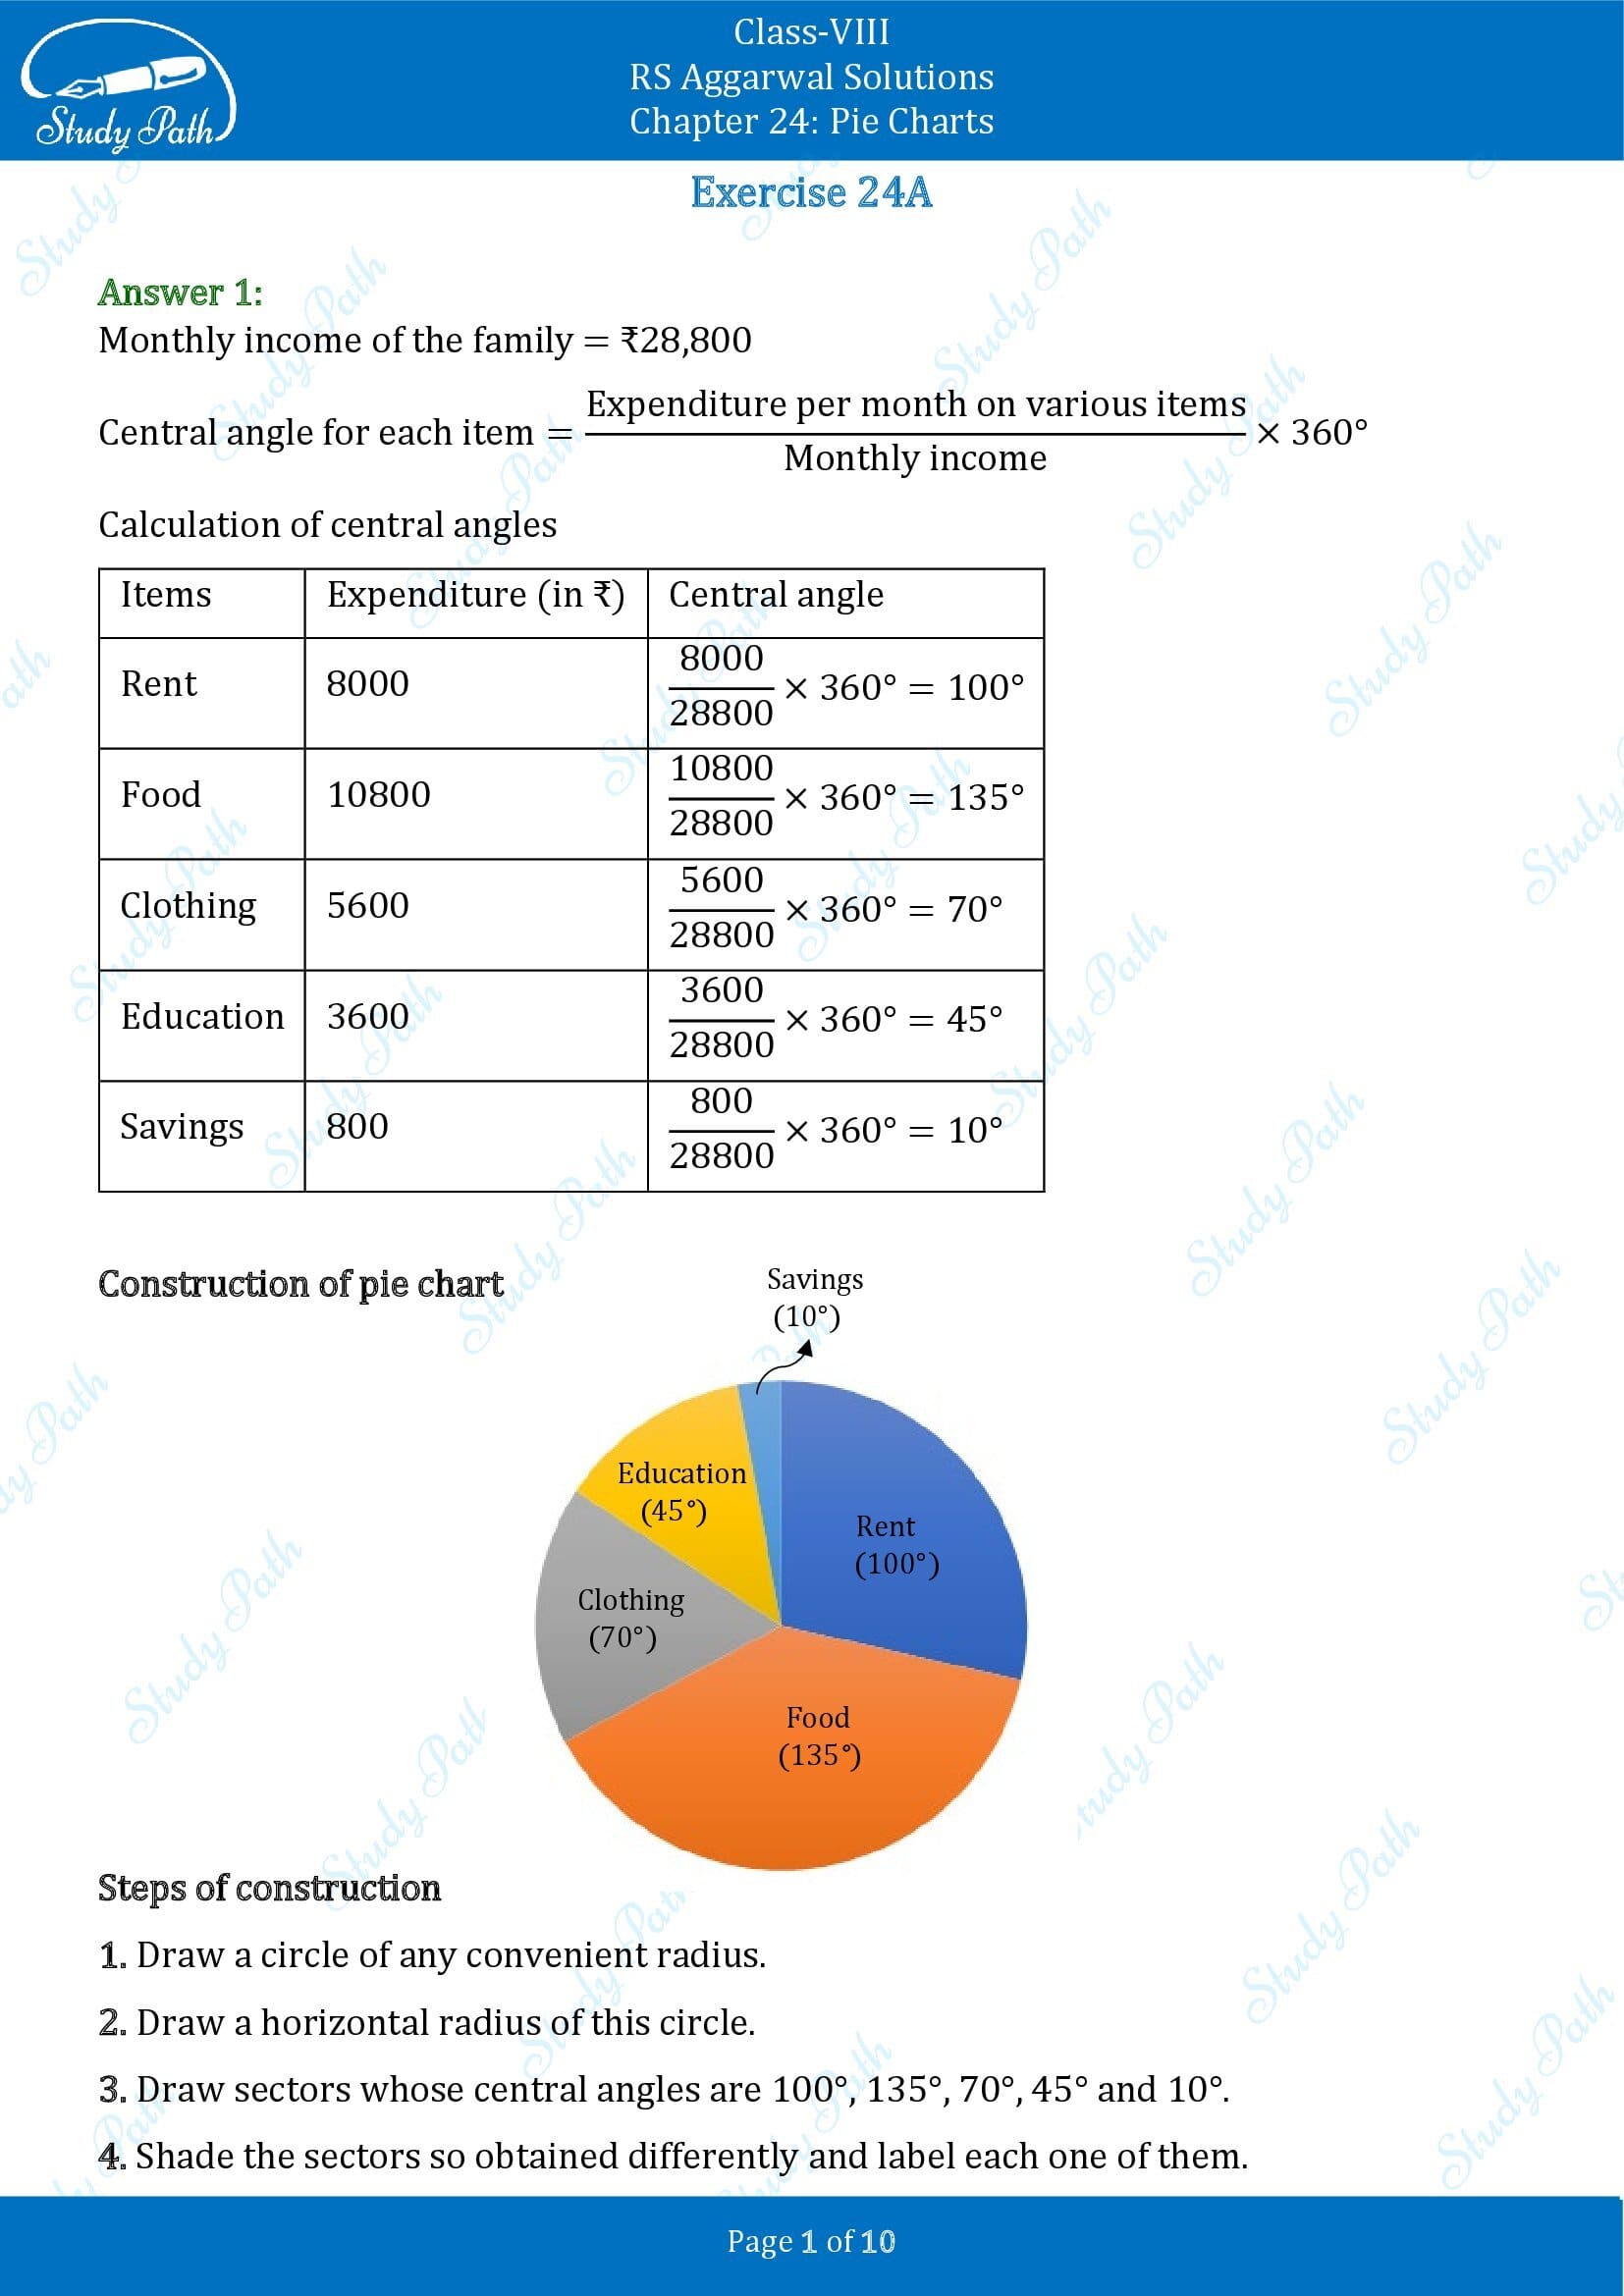 RS Aggarwal Solutions Class 8 Chapter 24 Pie Charts Exercise 24A 00001